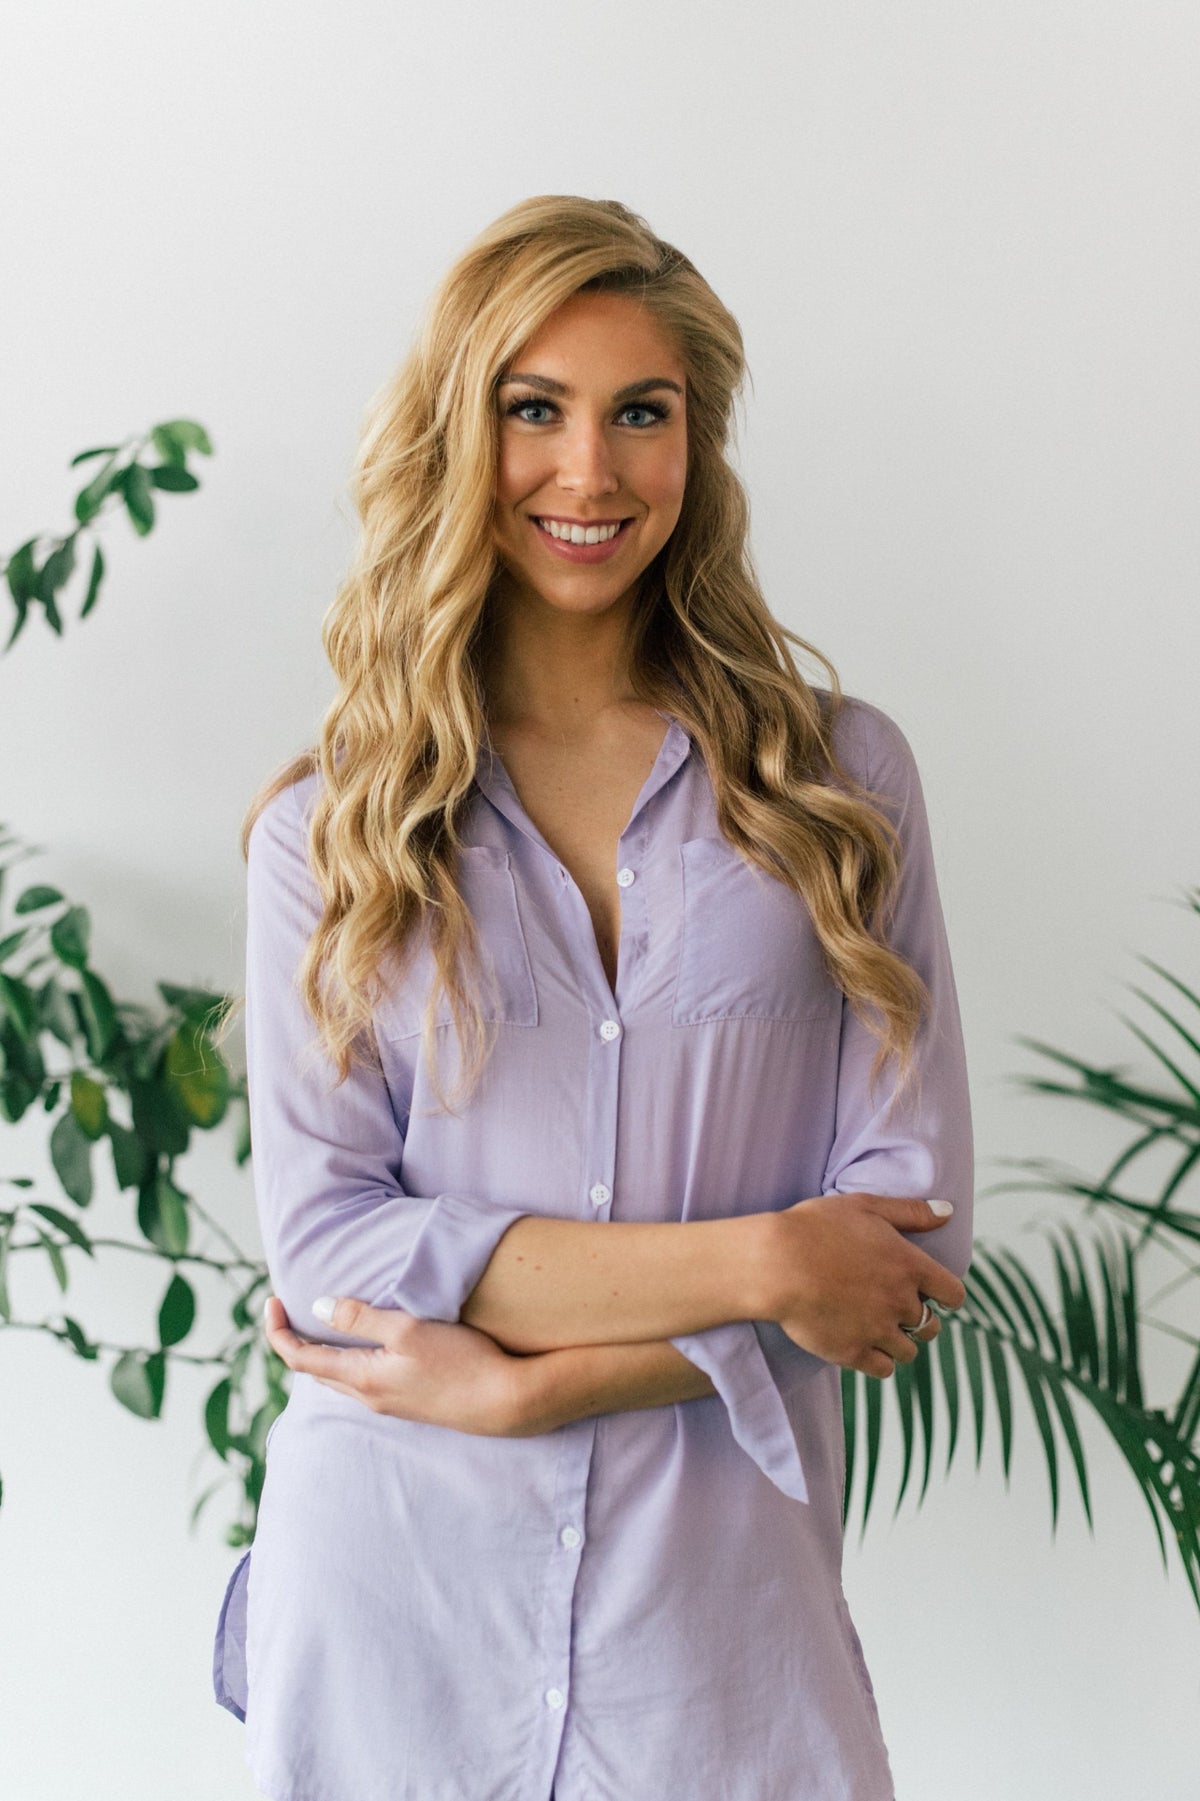 Lavender bridesmaid Boyfriend Shirt for getting ready, from By Catalfo